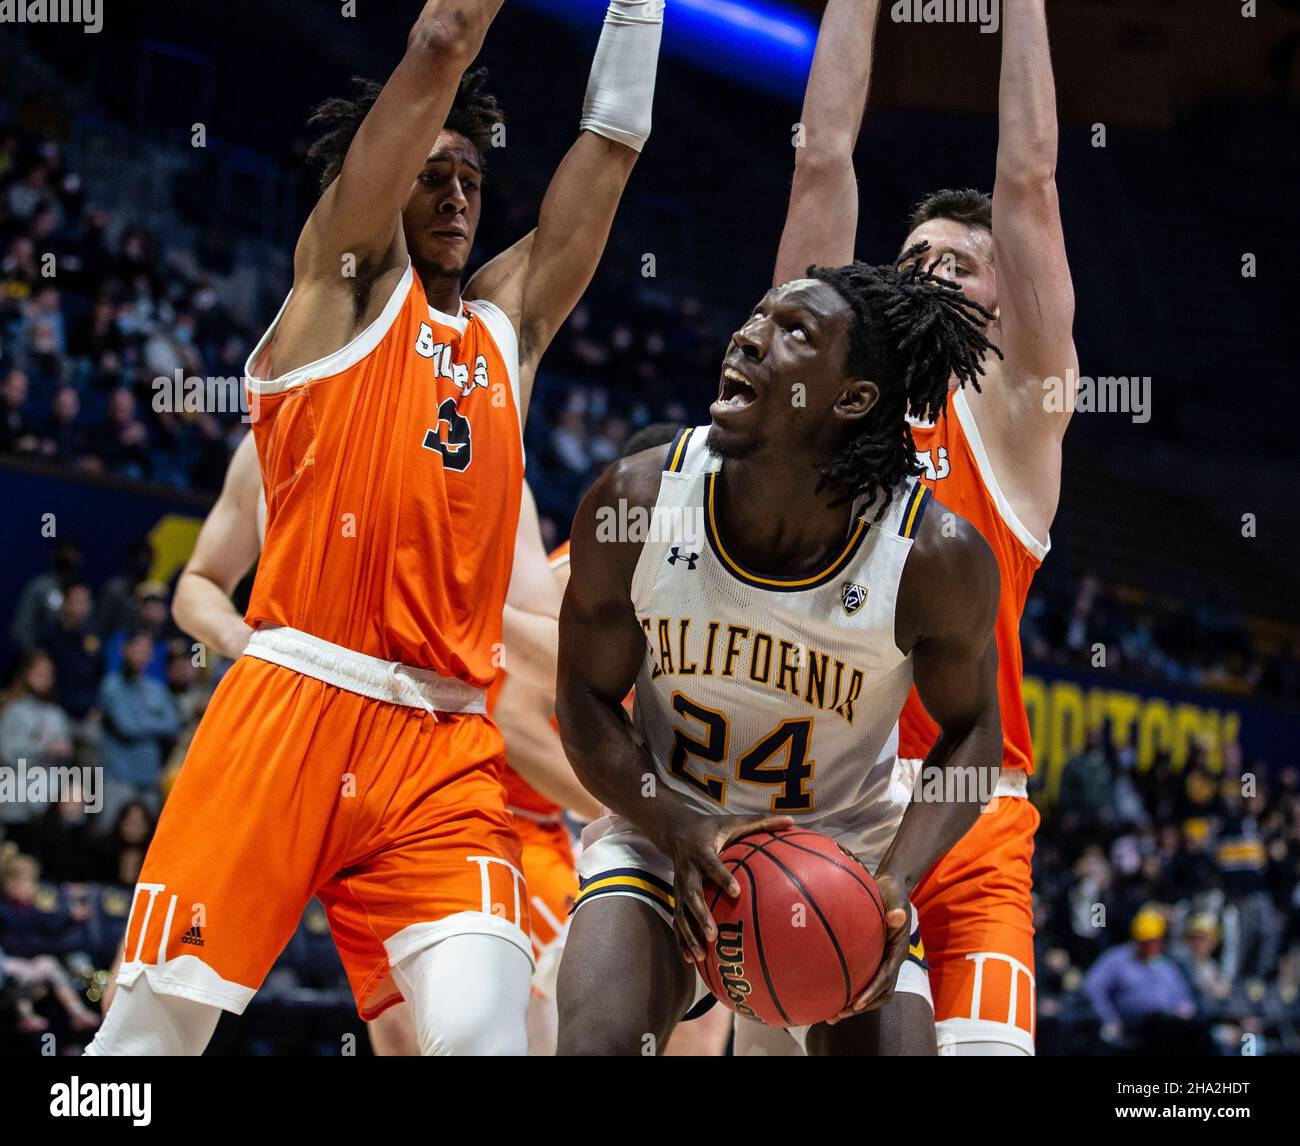 Hass Pavilion Berkeley Calif, USA. 08th Dec, 2021. CA U.S.A. California forward Sam Alajiki (24) tries to score surrounded by Idaho State players in the paint during the NCAA Men's Basketball game between Idaho State Bengals and the California Golden Bears. California won 72-46 at Hass Pavilion Berkeley Calif. Thurman James/CSM/Alamy Live News Stock Photo